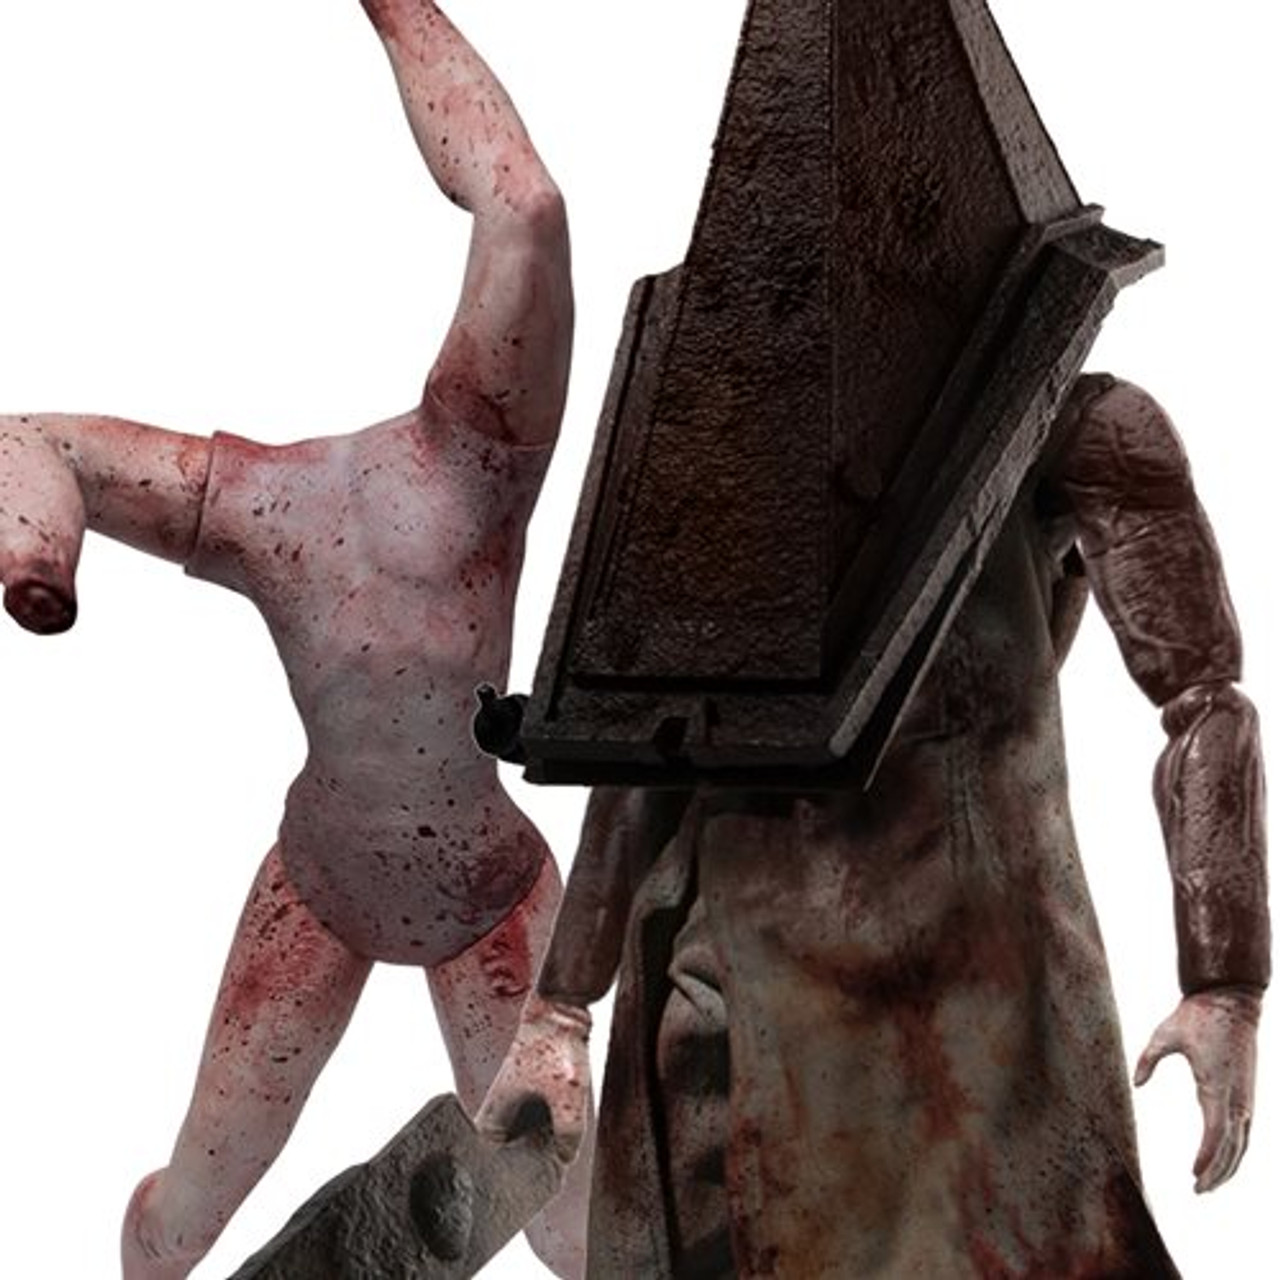  Mezco Red Pyramid Thing Silent Hill 2 One:12 Collective Edition  Figure : Toys & Games